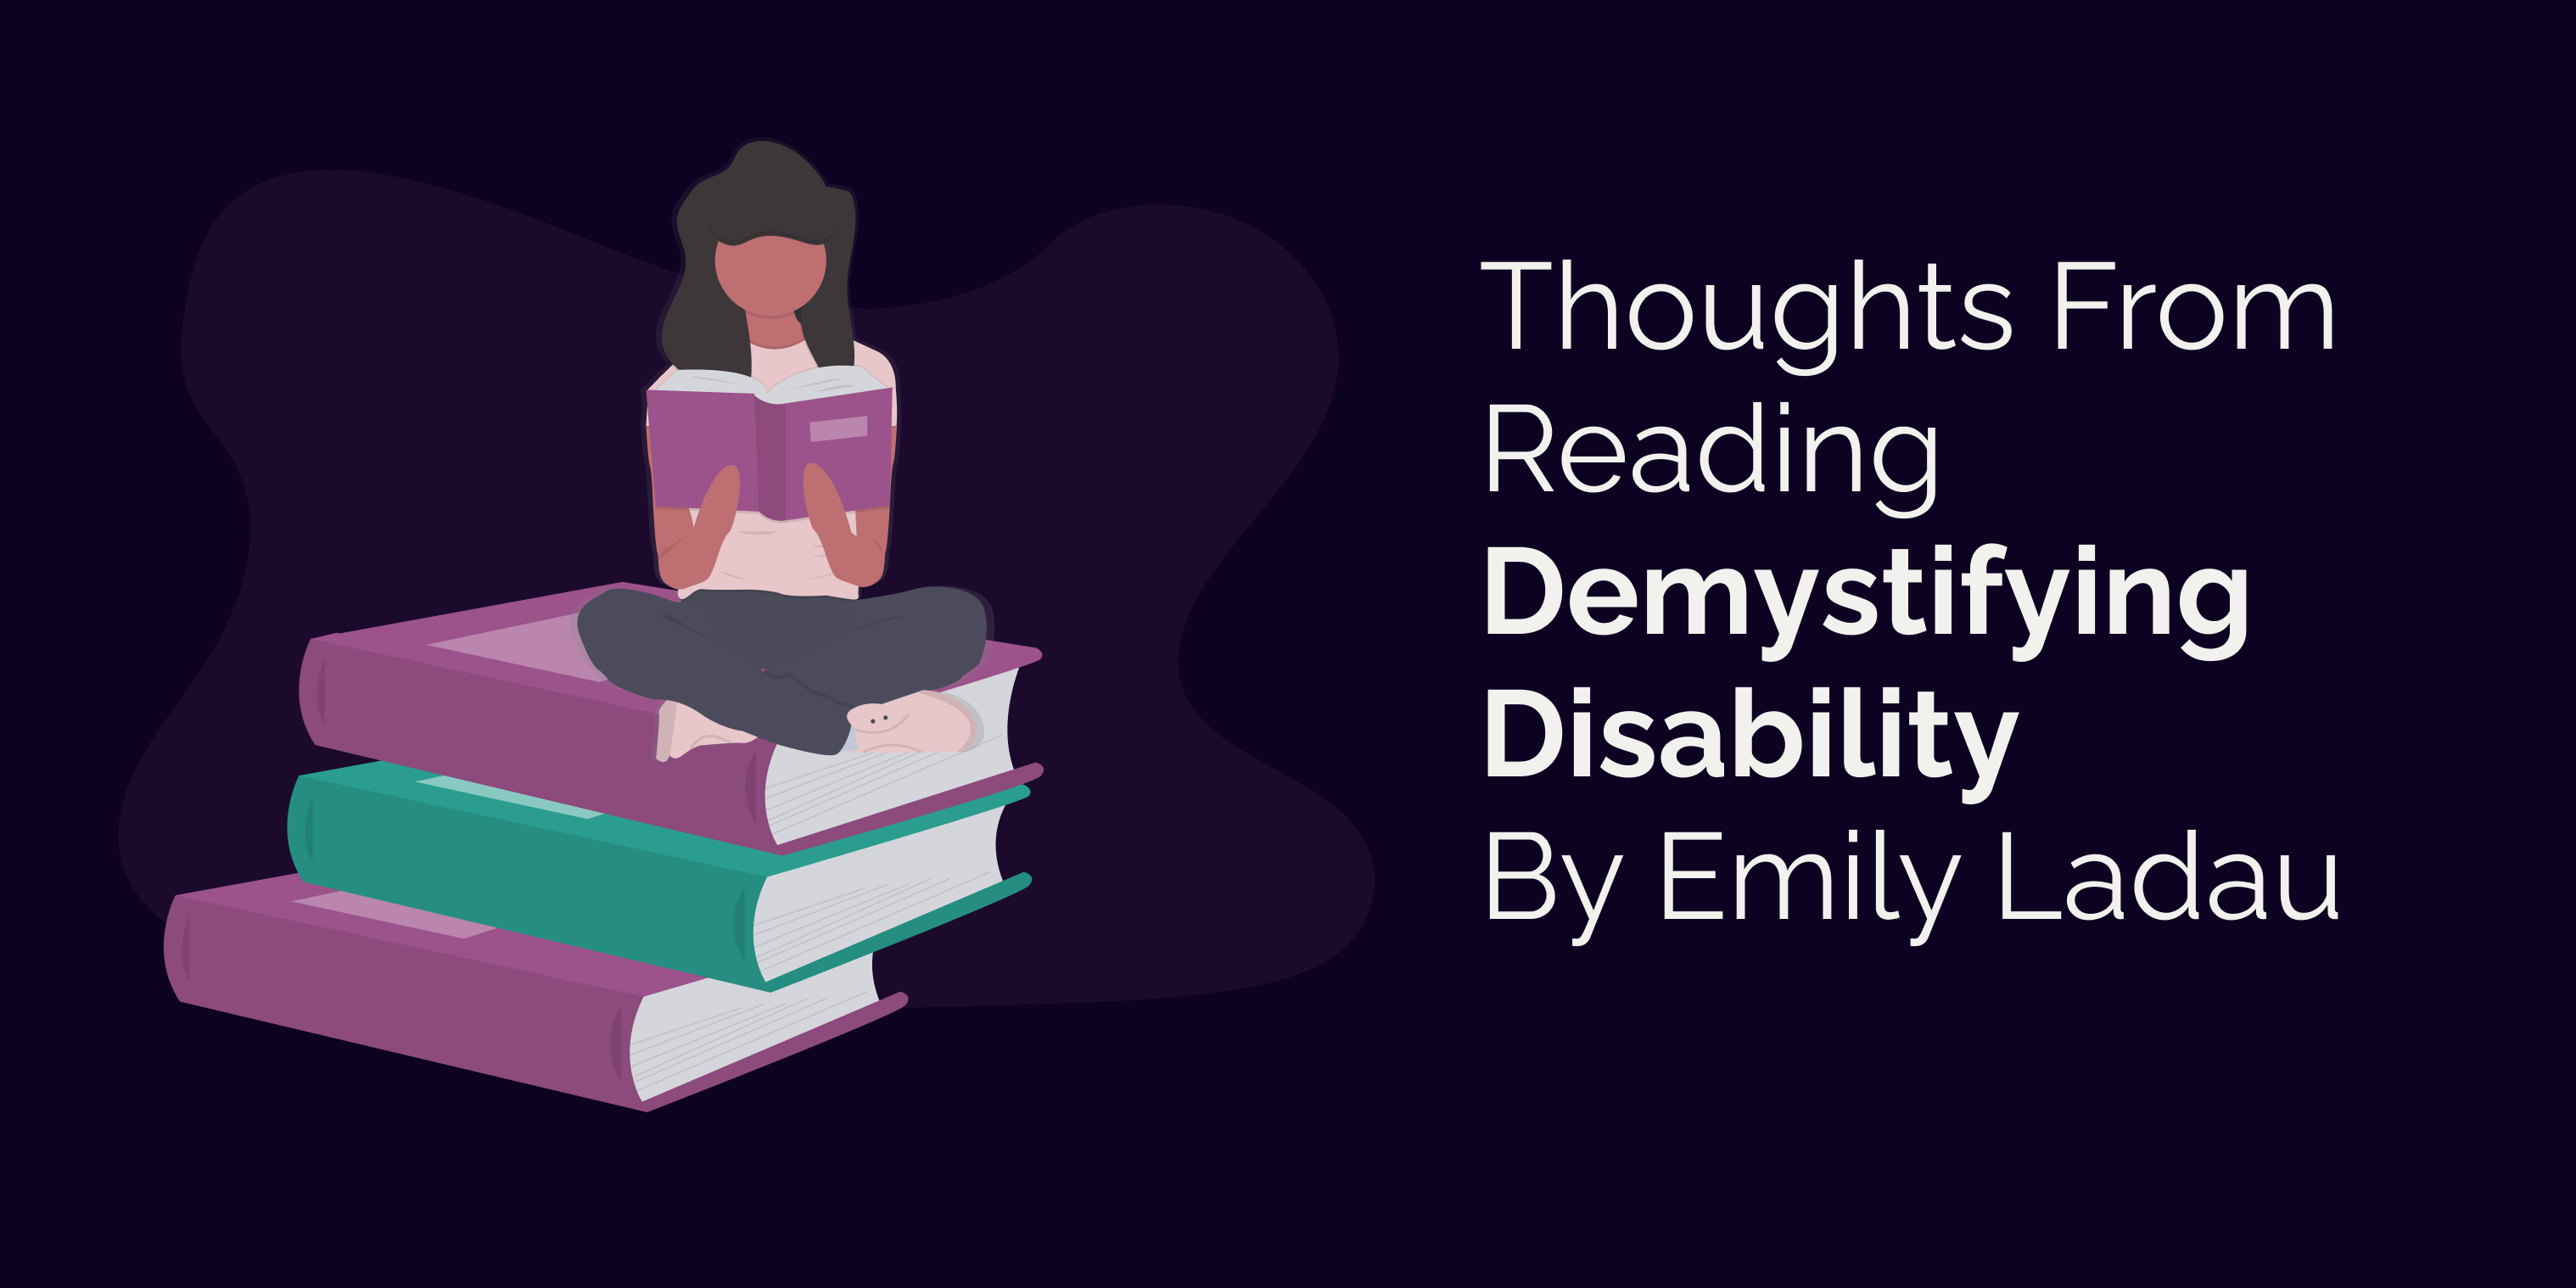 Text: Thoughts from reading Demystifying Disability by Emily Ladau with an illustration of a woman reading a book and sitting on top of three stacked books.